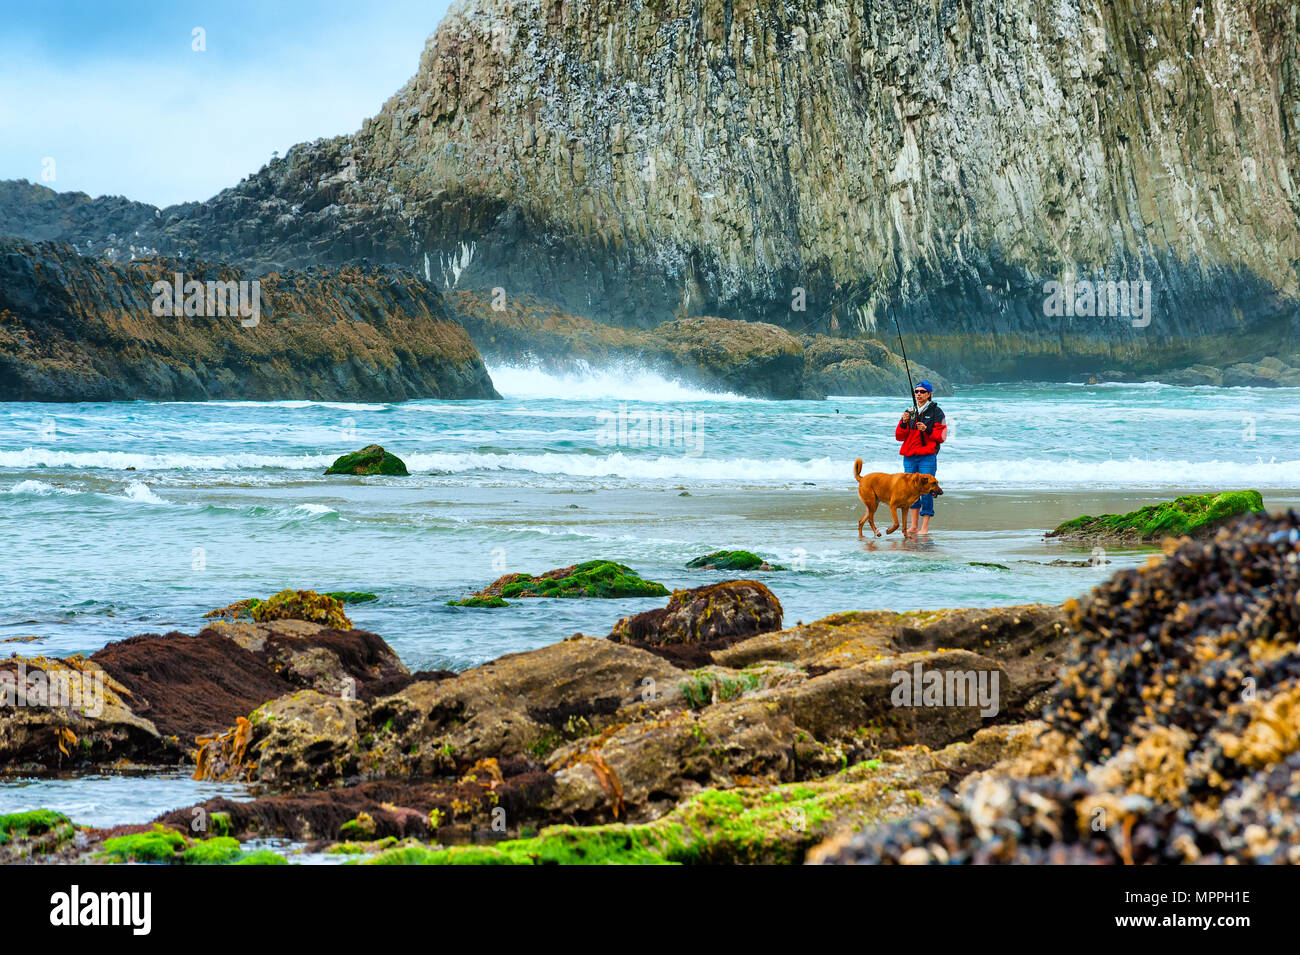 Seal Rock, Oregon,USA - May 3, 2016A lady fisherman fishes the surf at Seal Rock Beach while her dog plays in the incoming waves on the Oregon Coast. Stock Photo